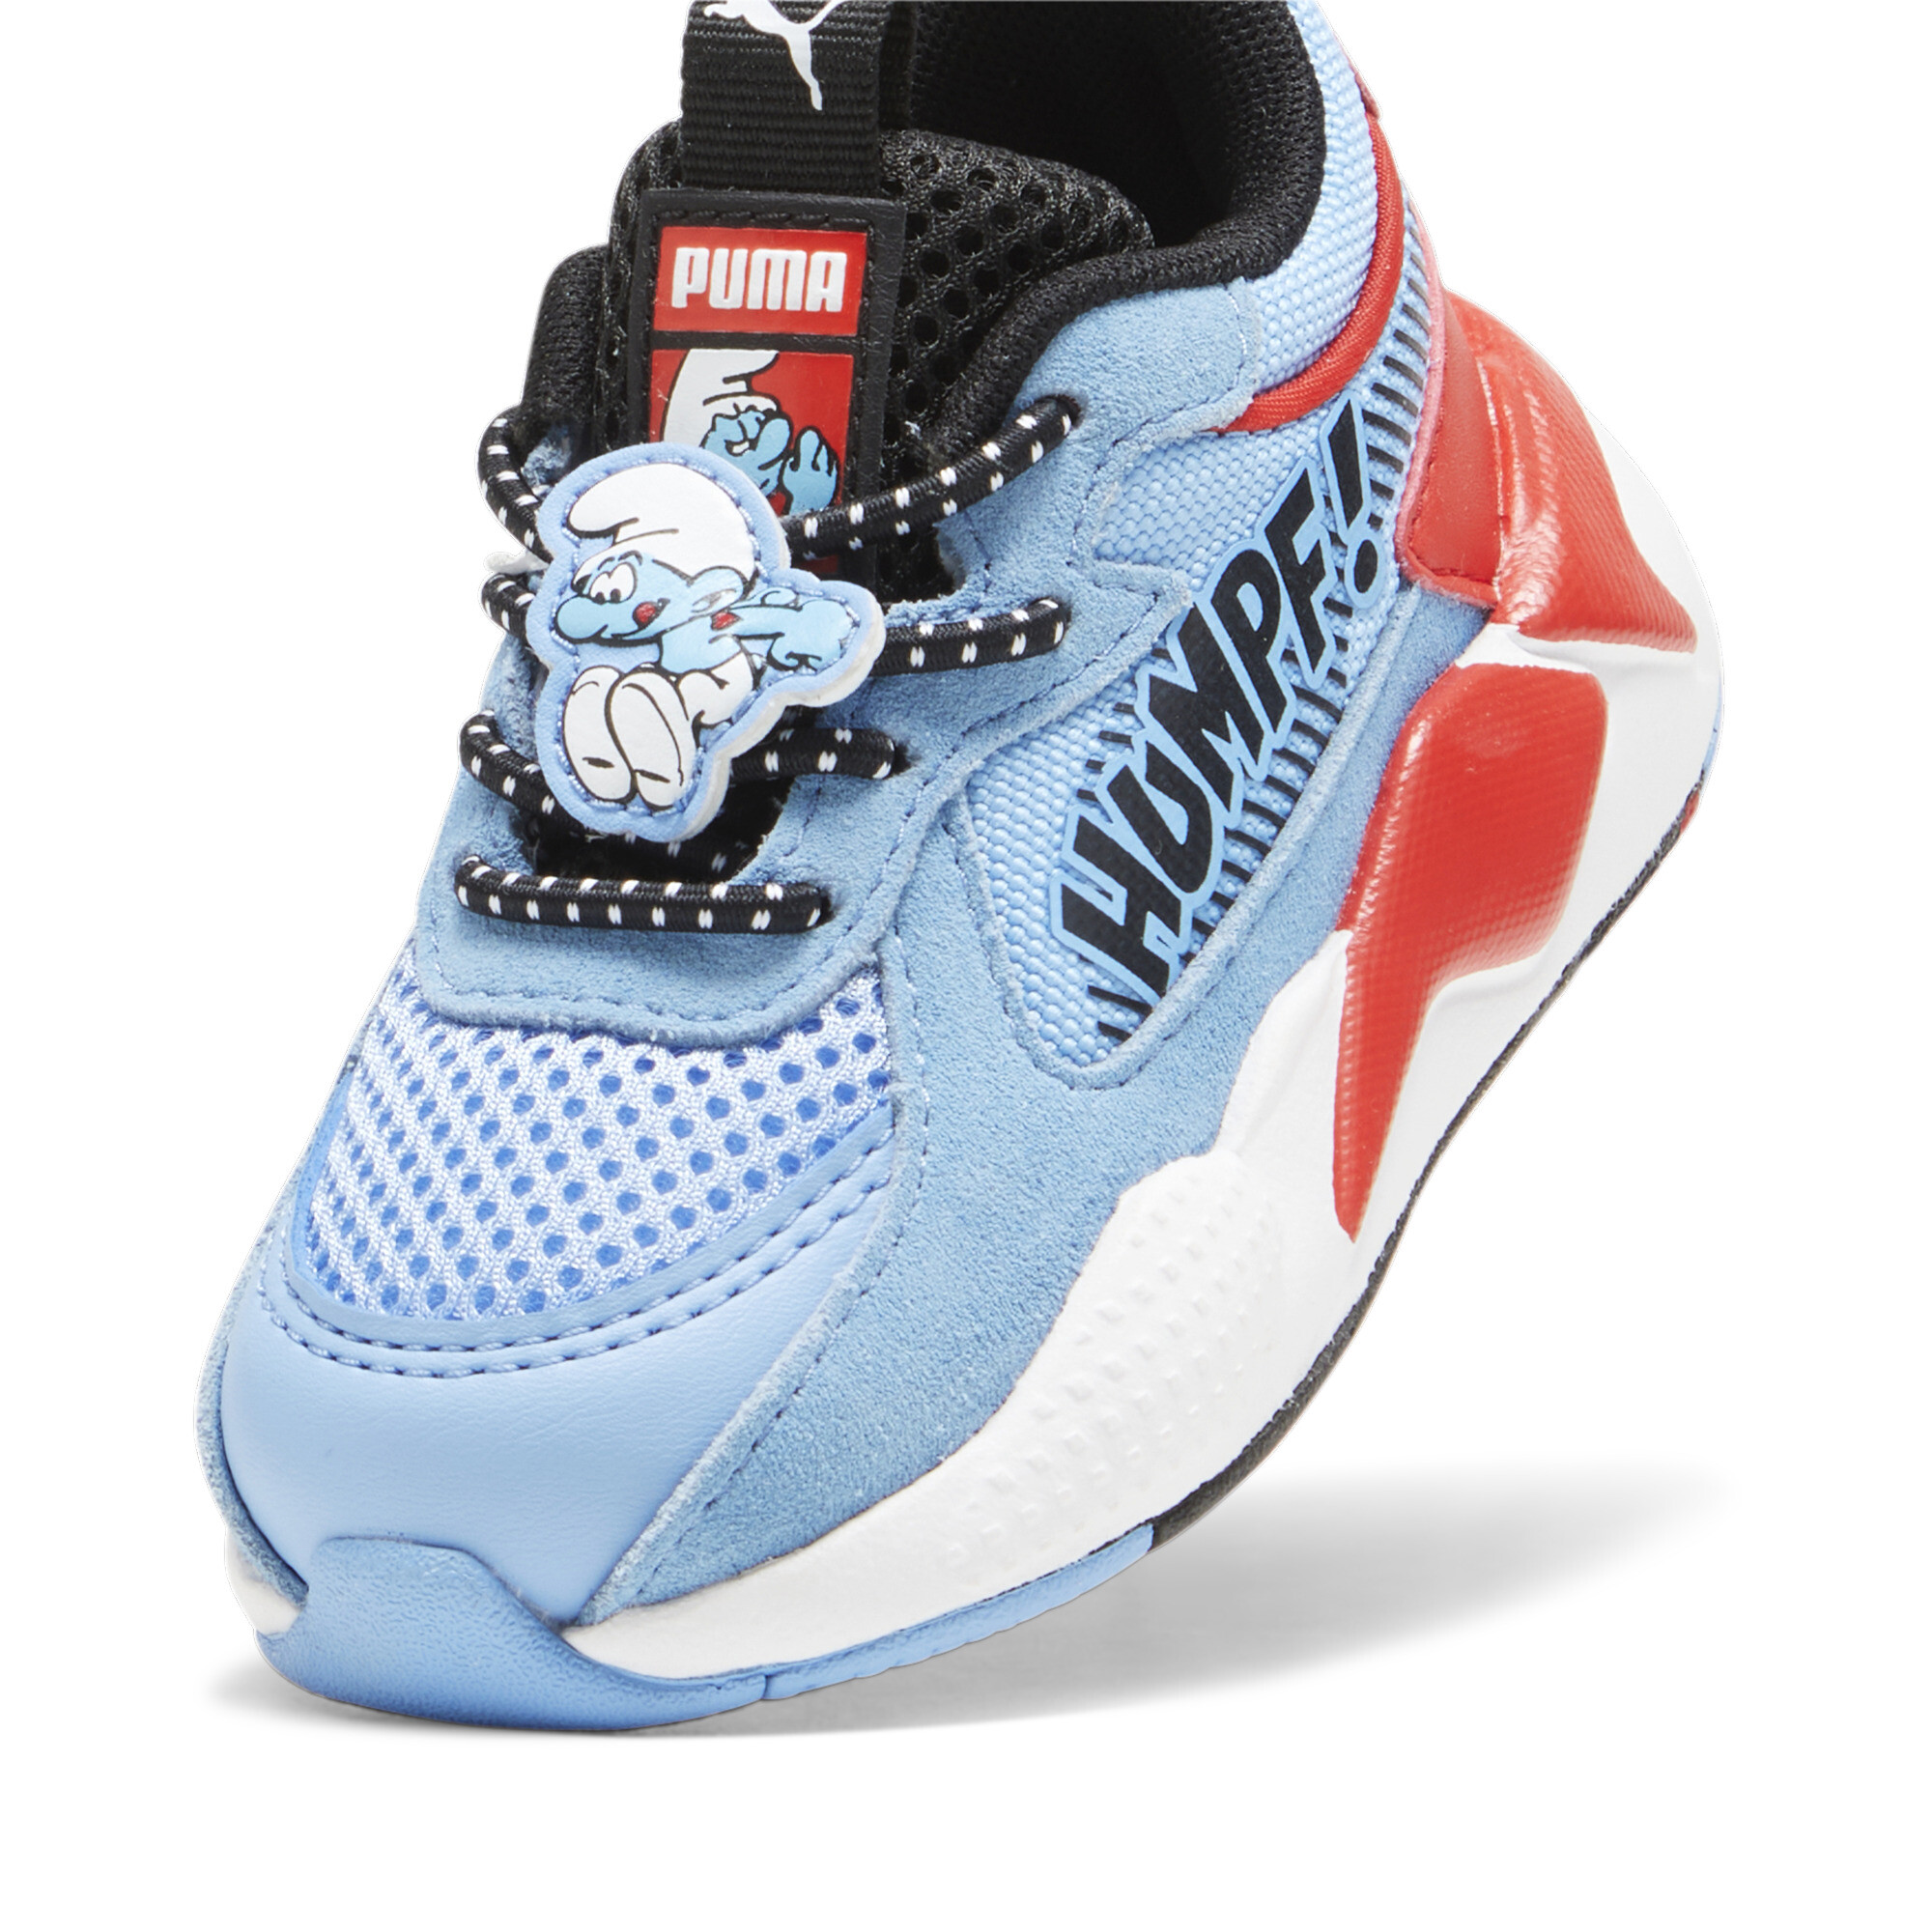 Kids' PUMA X THE SMURFS RS-X Toddlers' Sneakers In Blue, Size EU 21